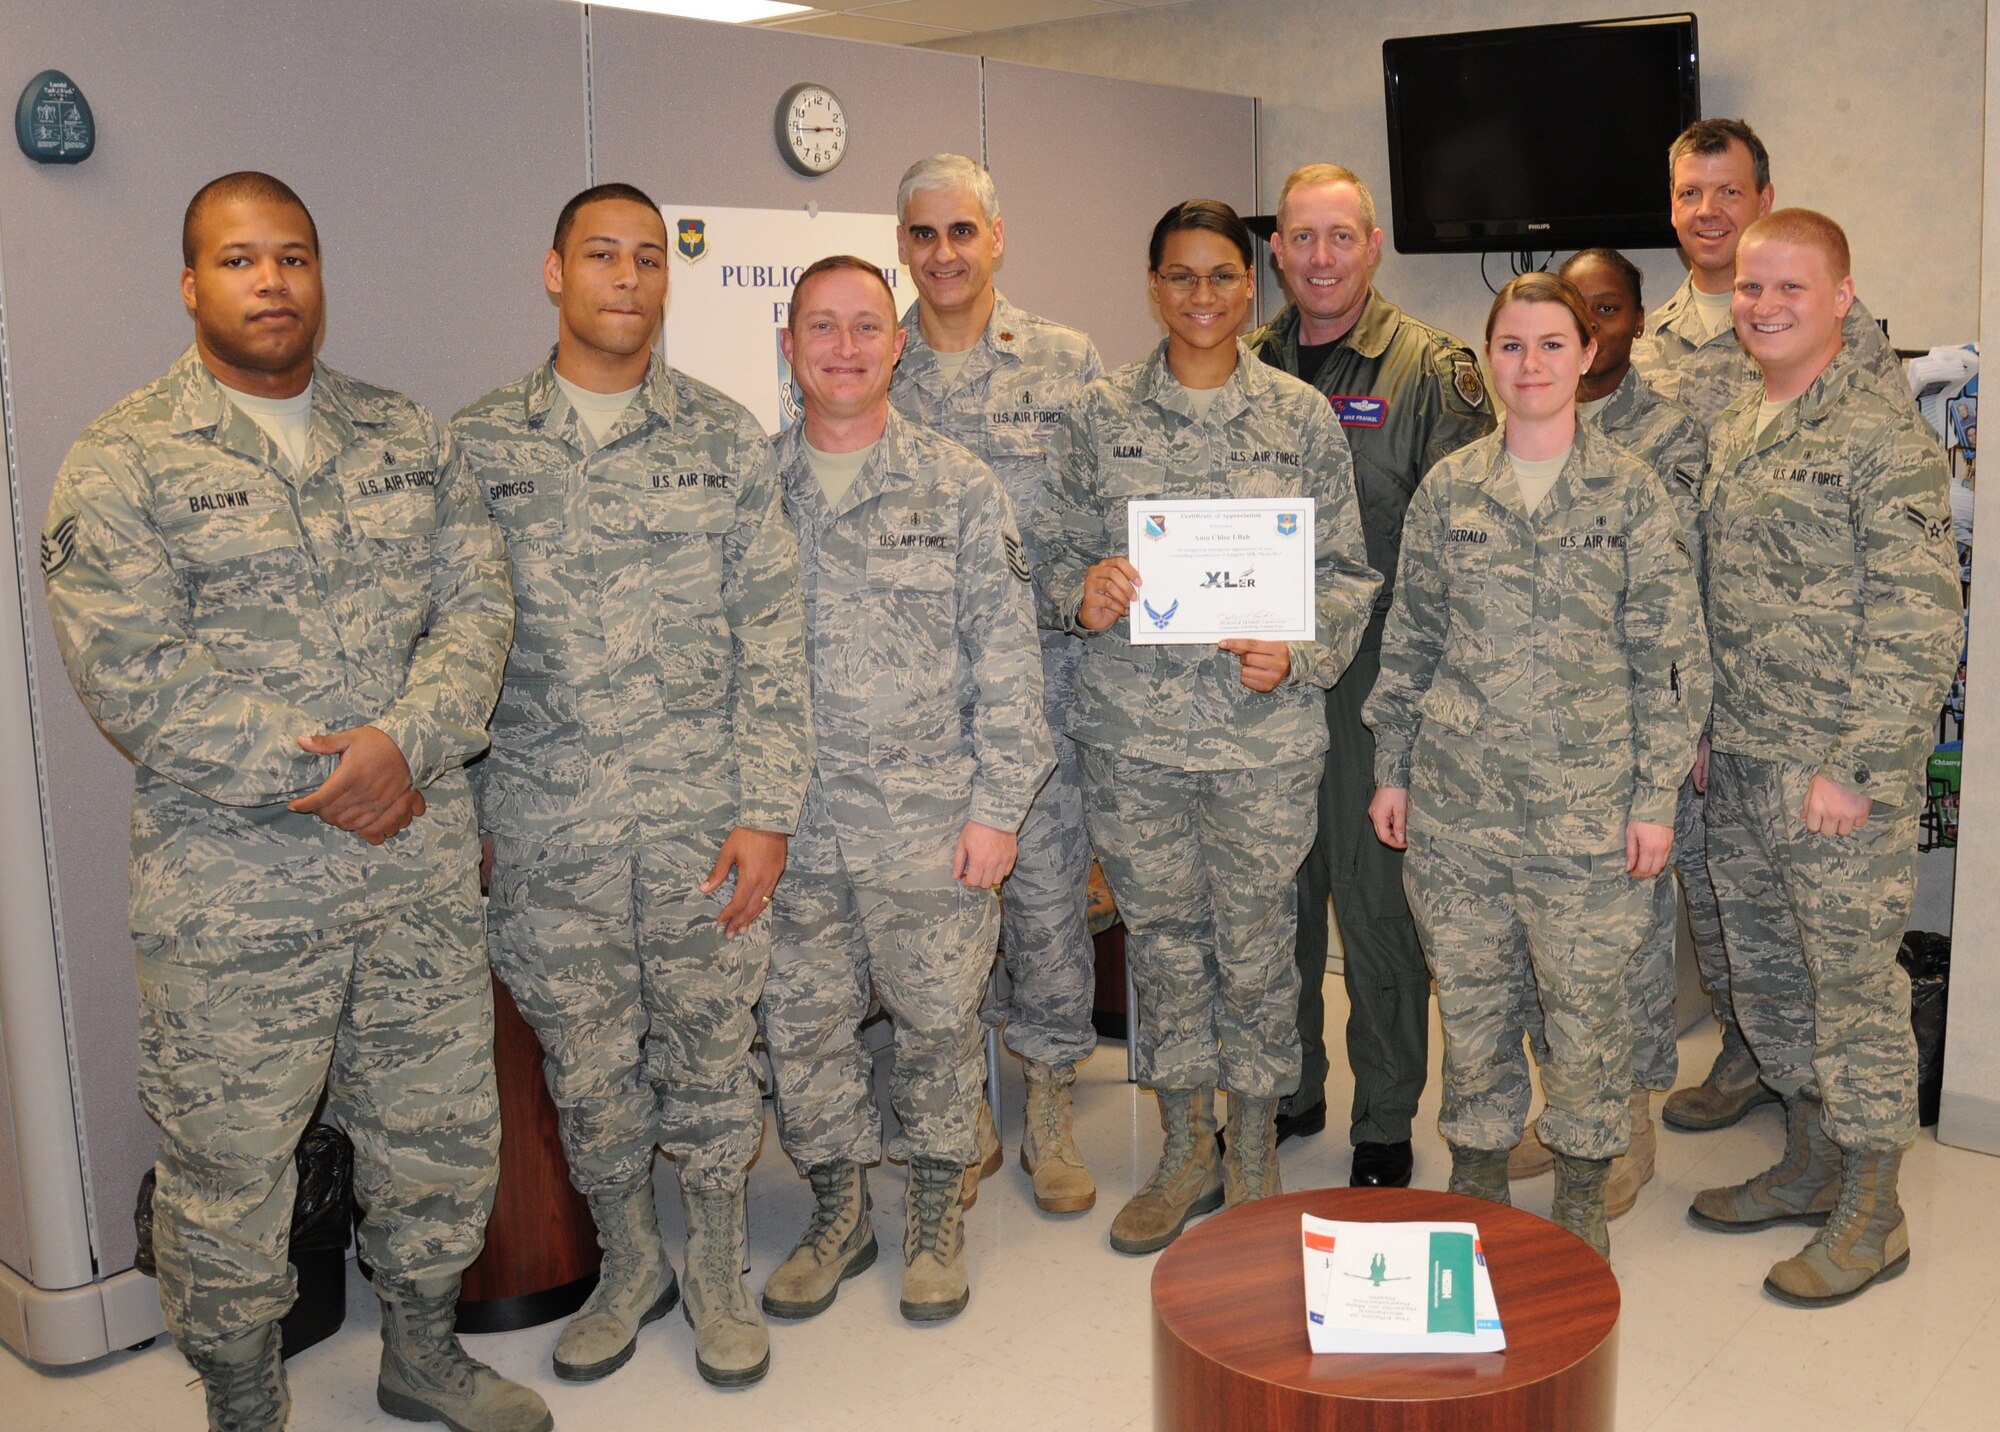 LAUGHLIN AIR FORCE BASE, Texas – Airman Chloe Ullah, 47th Medical Operations Squadron, poses with Col. Michael Frankel, 47th Flying Training Wing commander, and fellow members of her squadron after being presented the XLer of the Week award Jan. 12. The XLer is a weekly award chosen by wing leadership and given to individuals who consistently make outstanding contributions to Laughlin and their unit. (U.S. Air Force photo by Airman 1st Class Blake Mize)